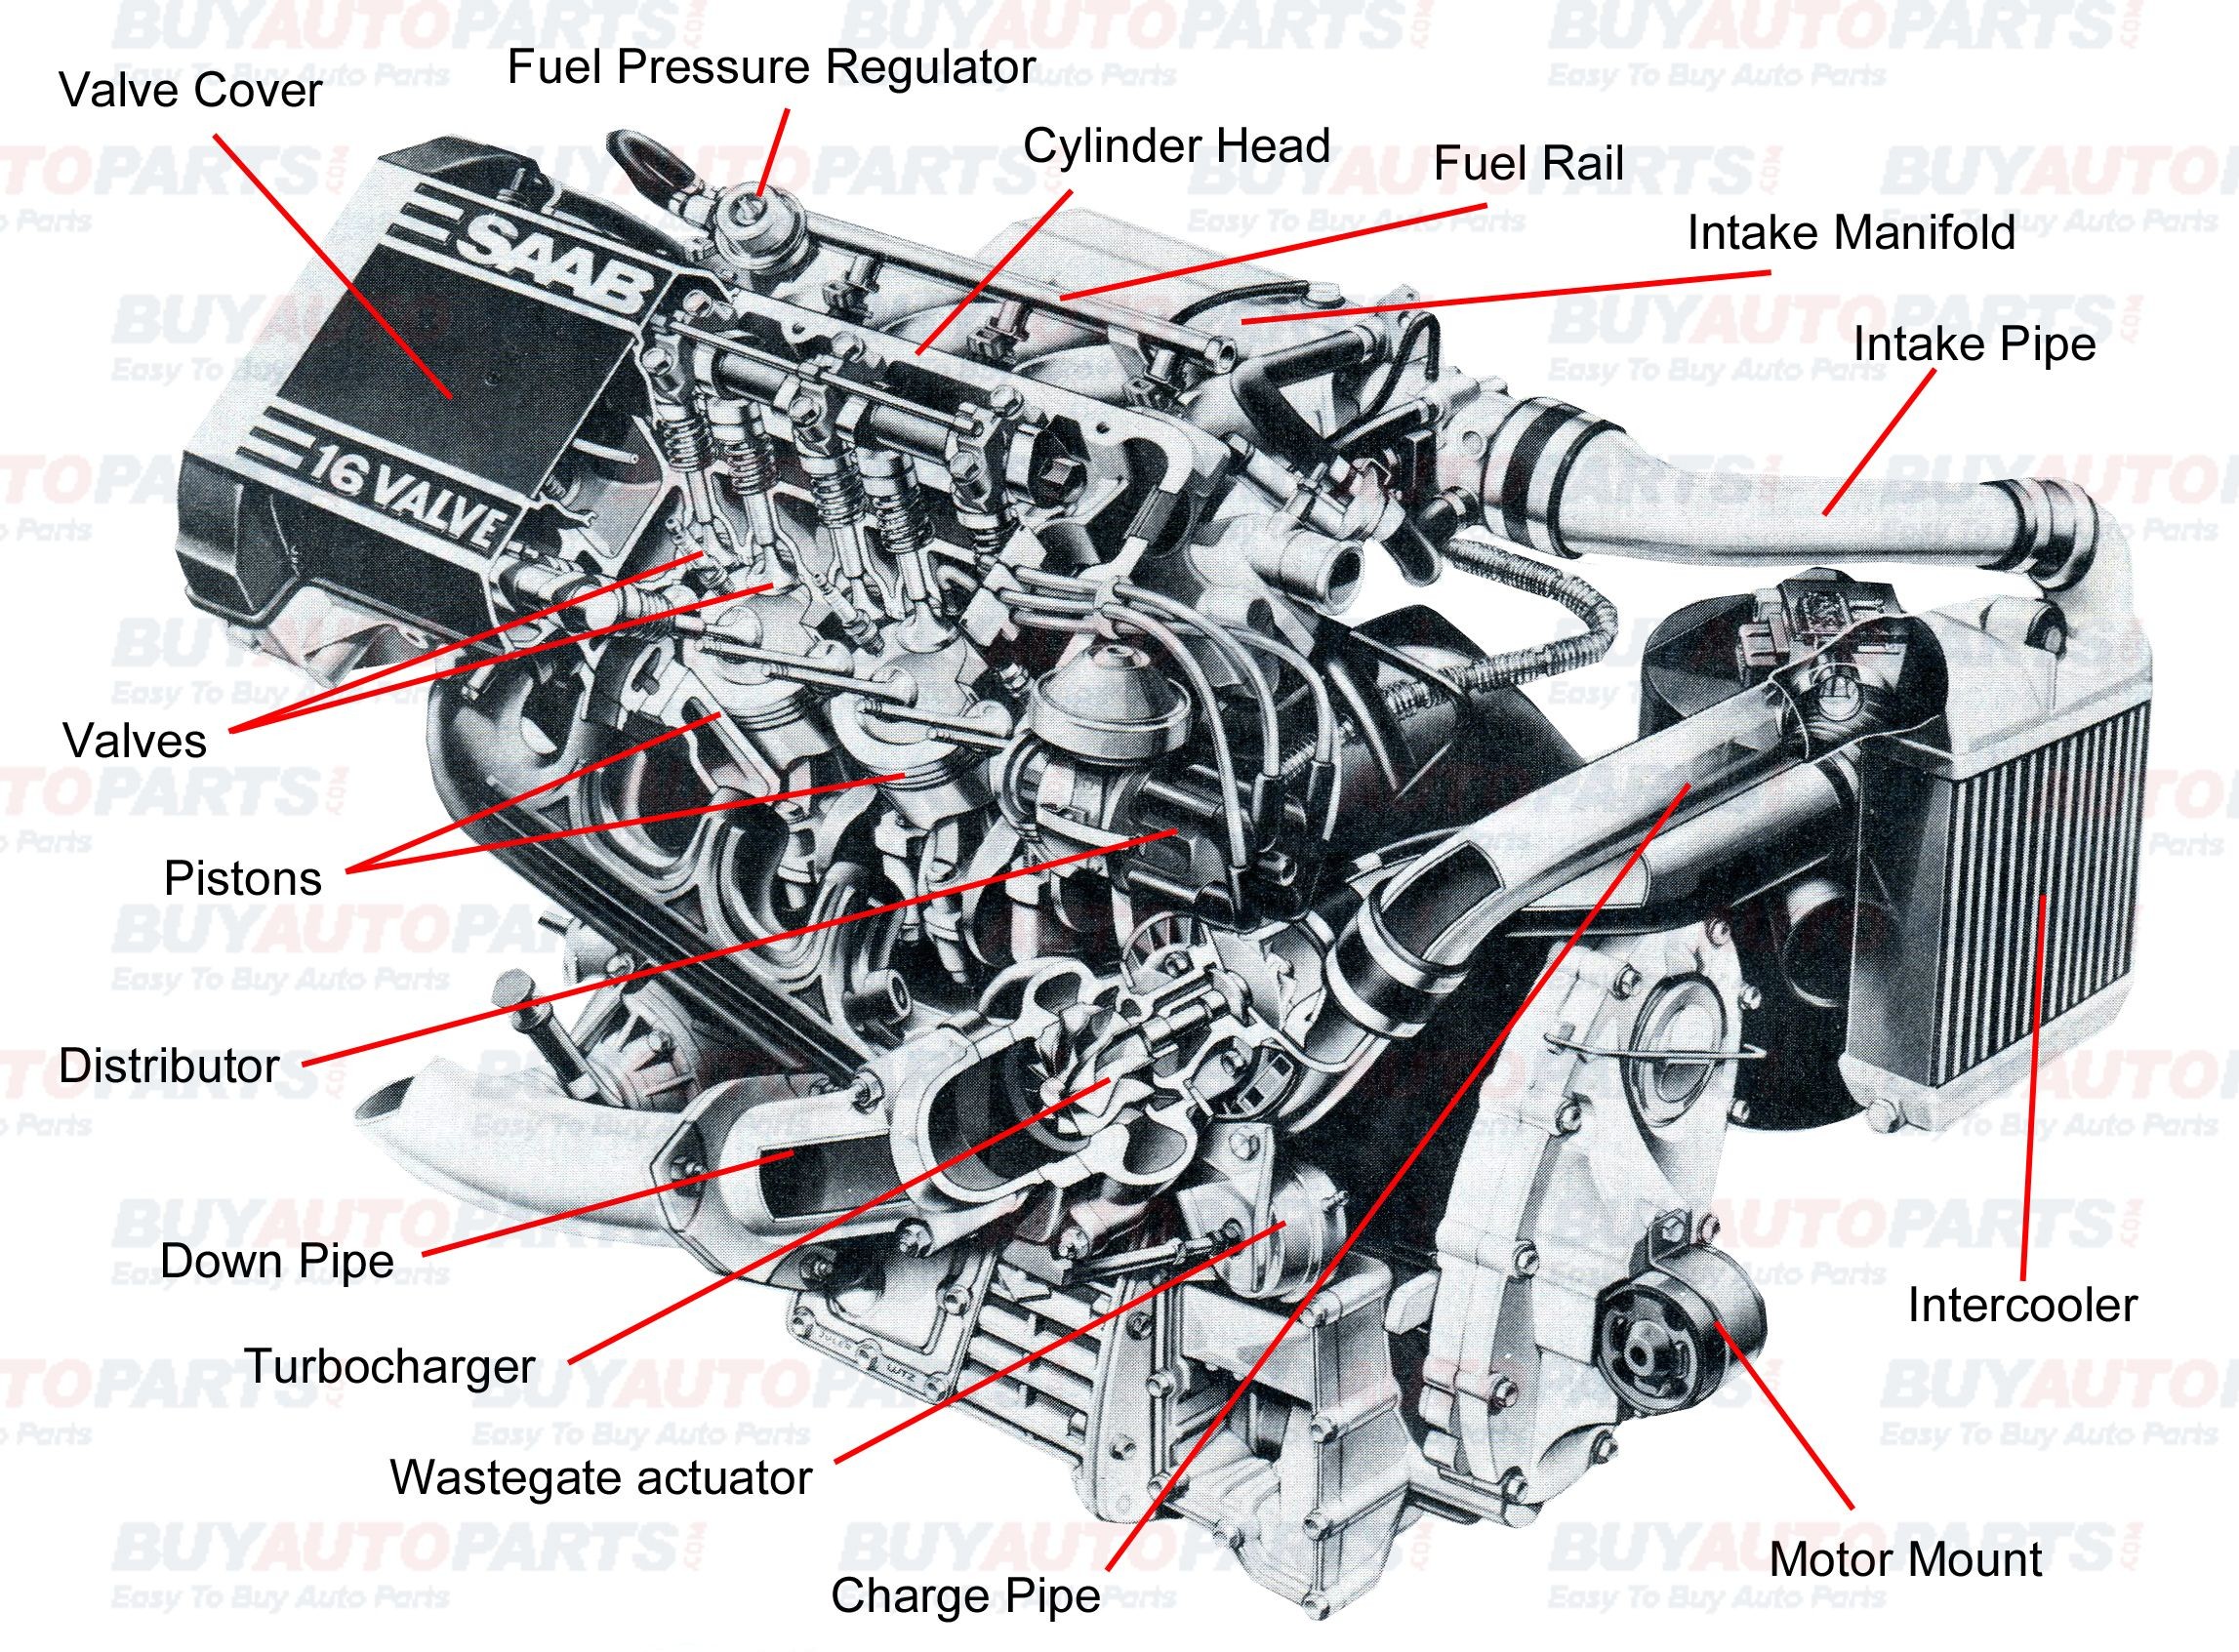 Diagram Of Car Brakes Pin by Jimmiejanet Testellamwfz On What Does An Engine with Of Diagram Of Car Brakes